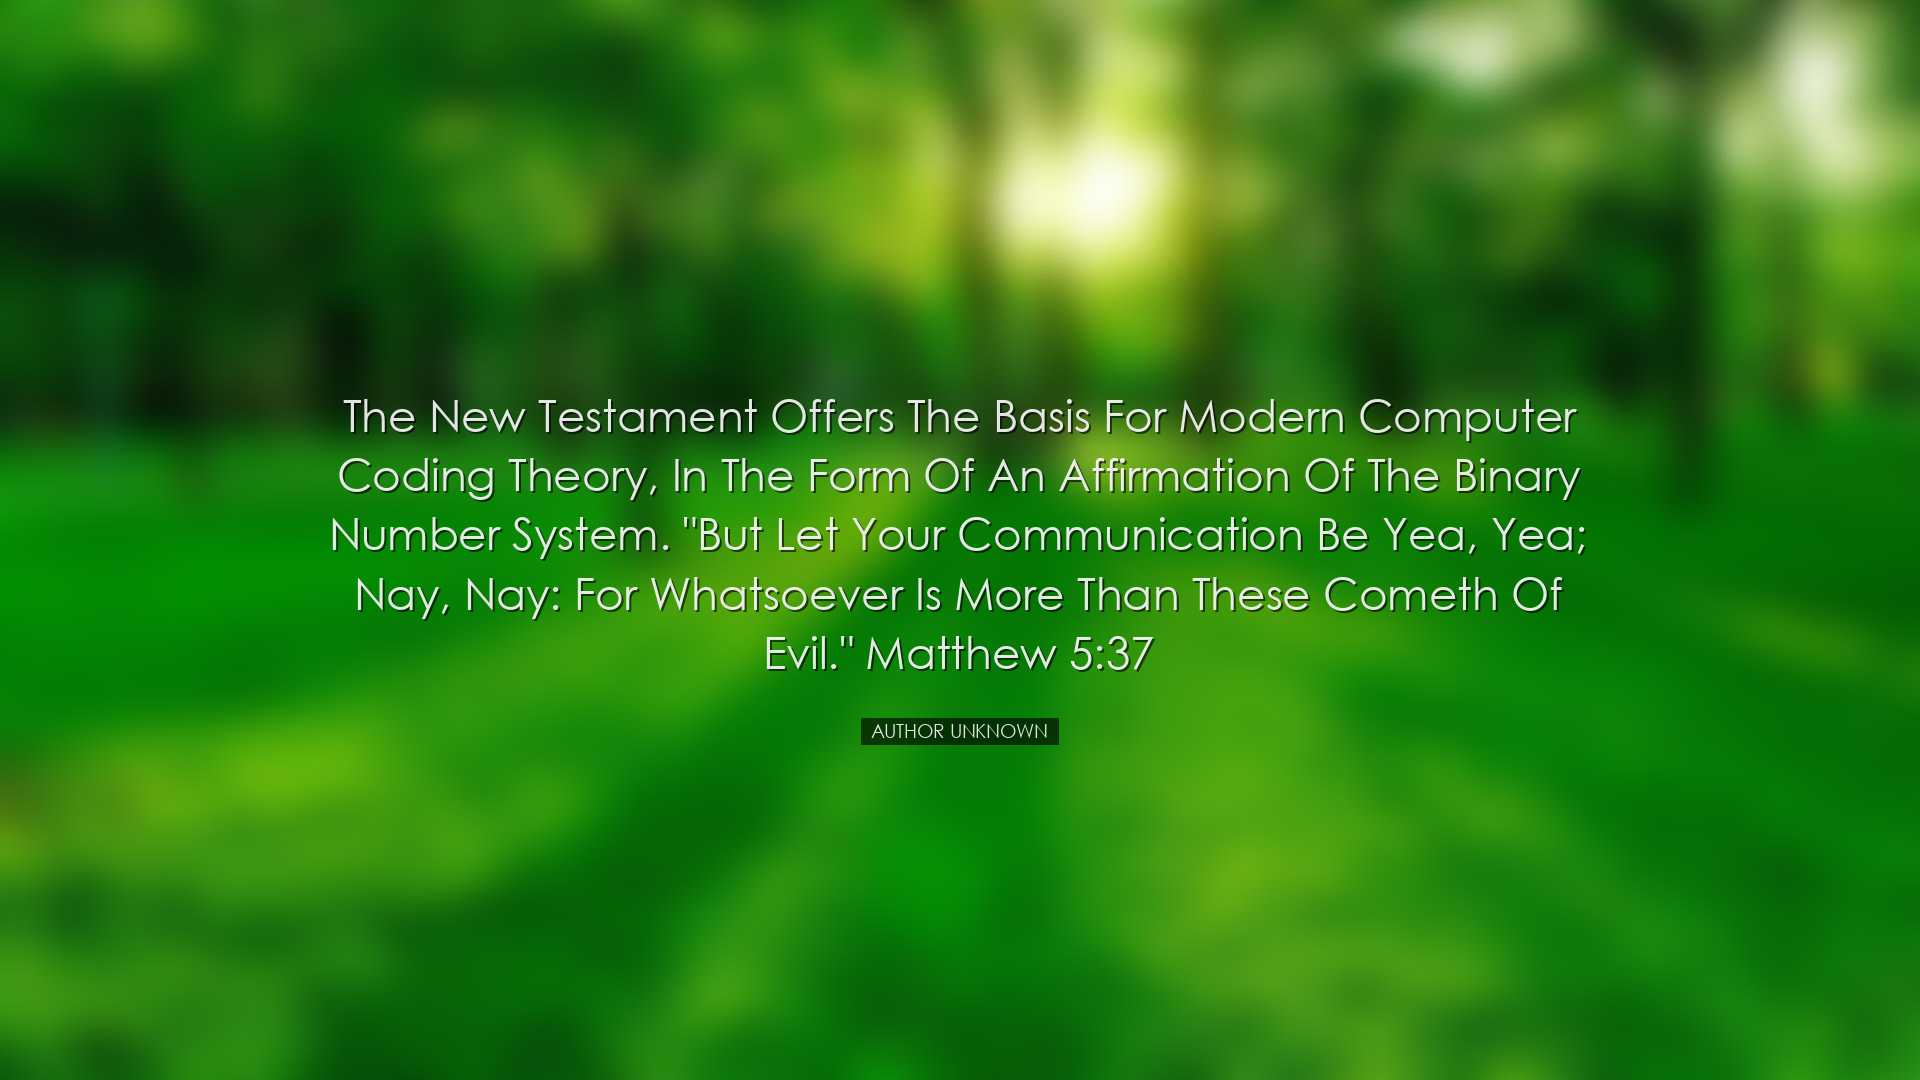 The New Testament offers the basis for modern computer coding theo